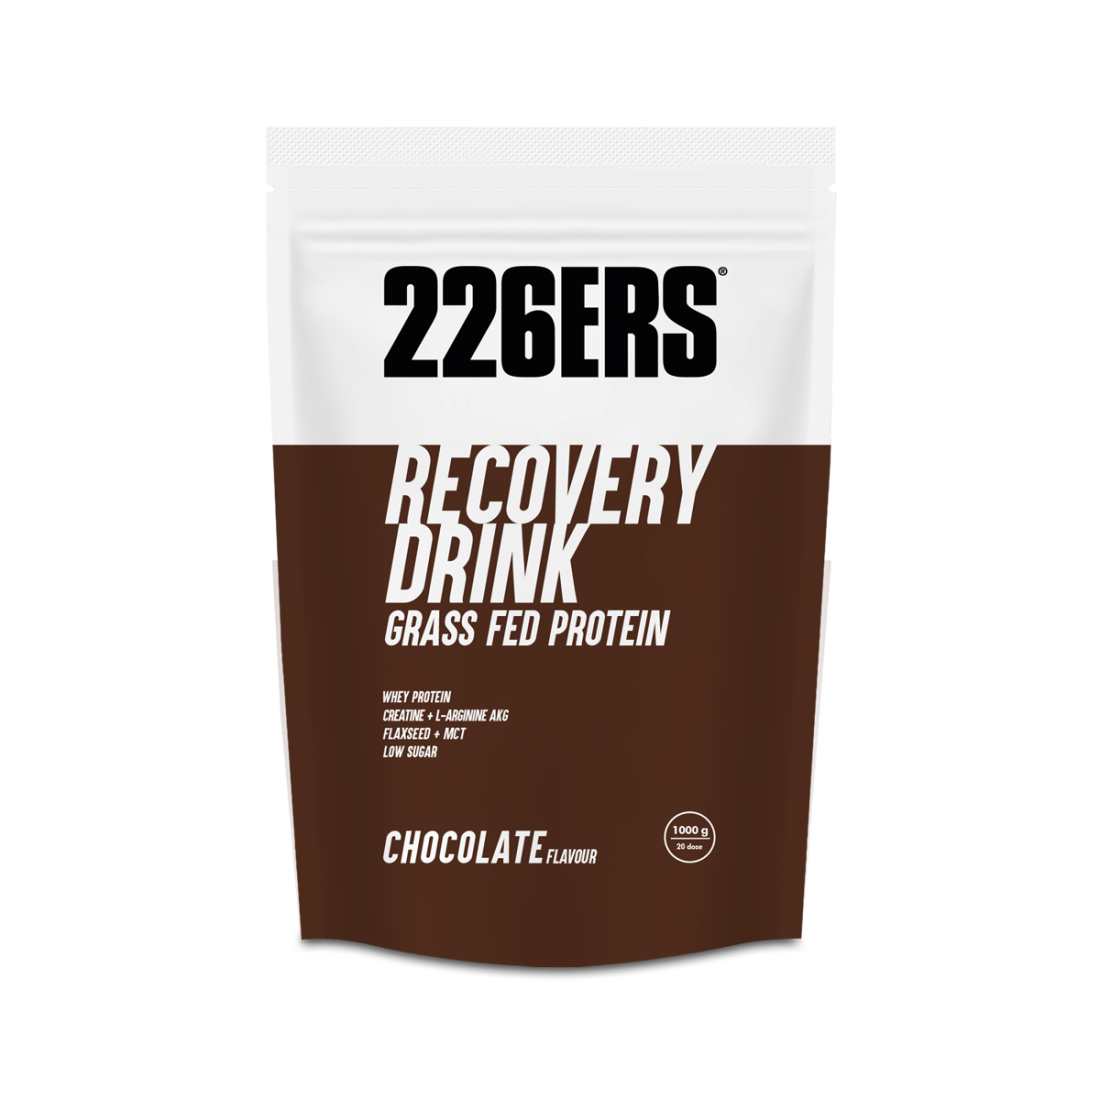 RECOVERY DRINK - Grass Fed Protein -...